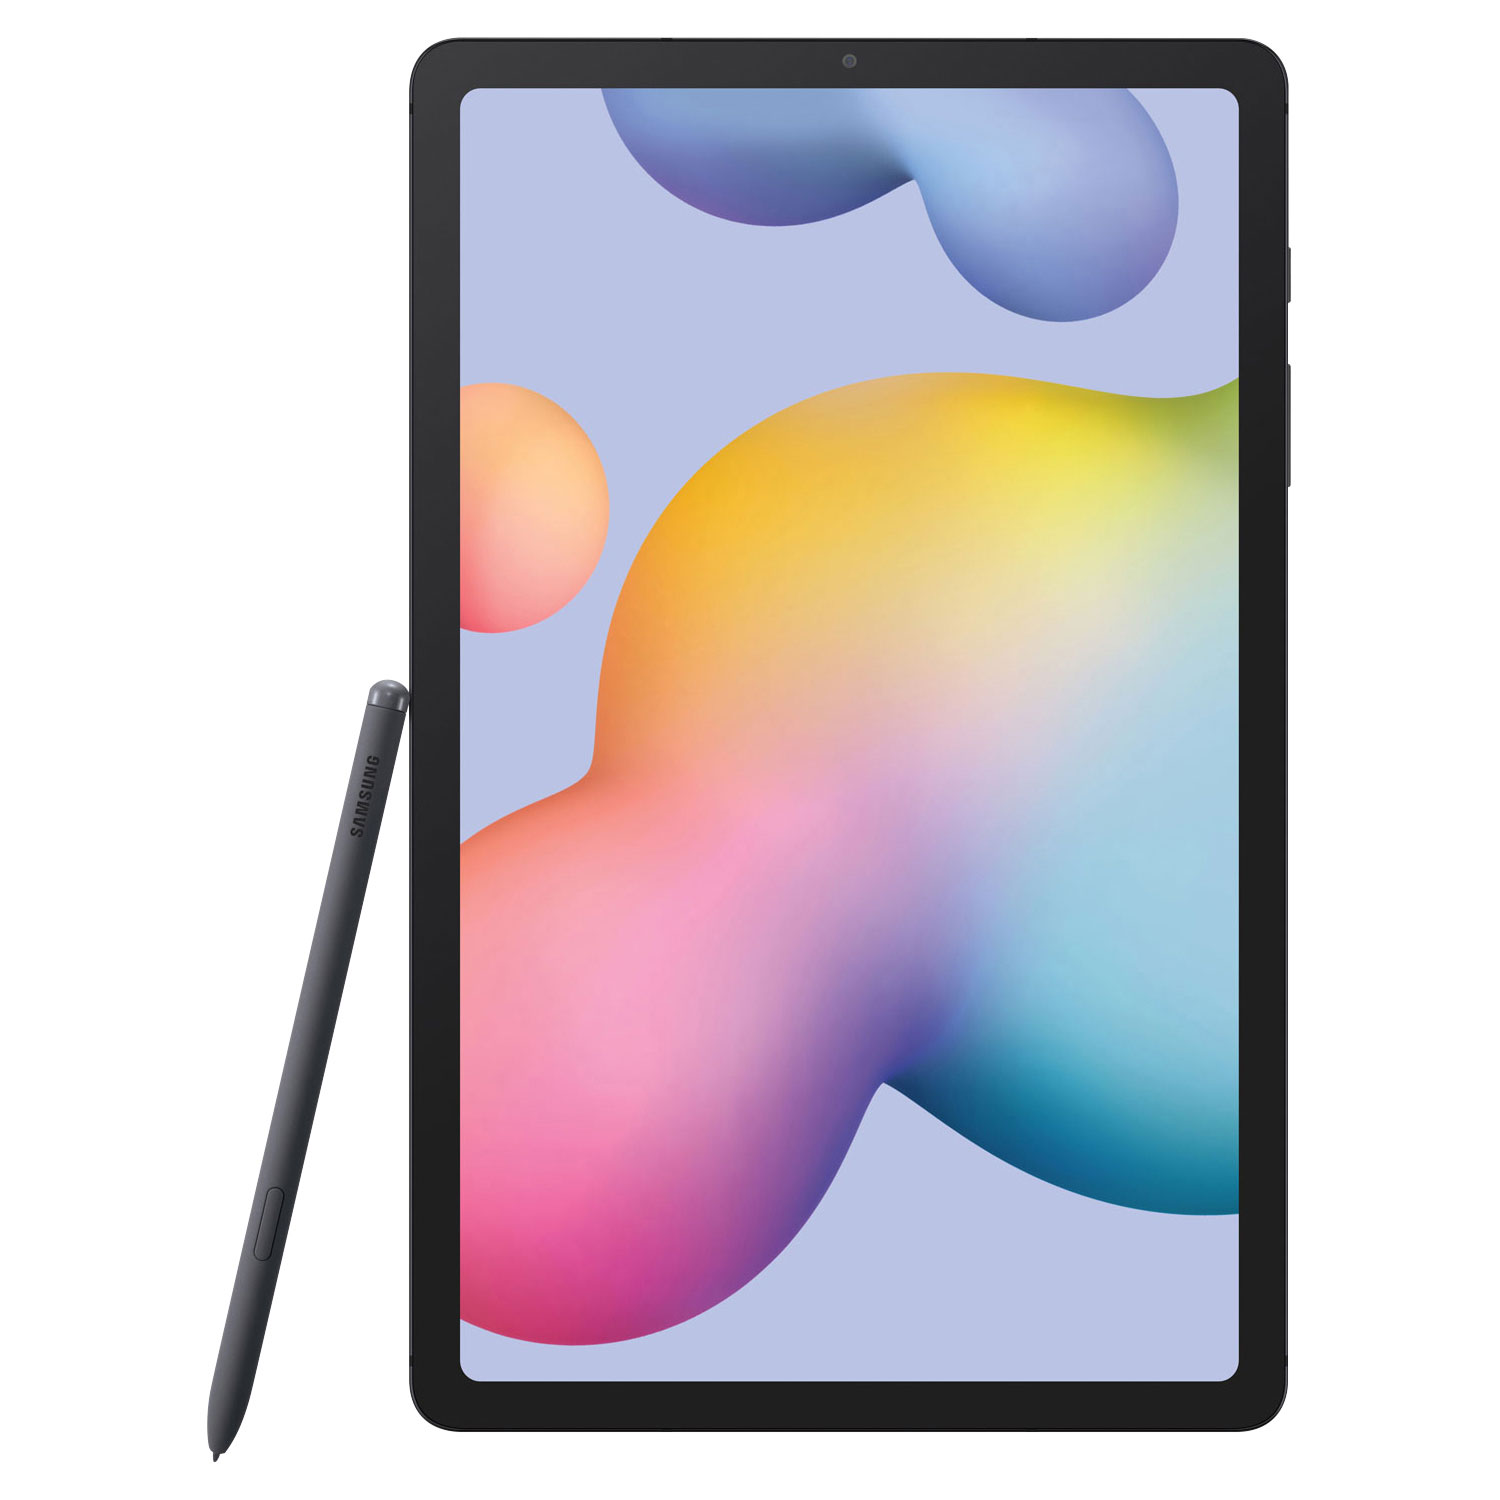 Samsung Galaxy Tab S6 Lite 10.4" 64GB Android 12 Tablet with Snapdragon 720G 8-Core Processor - Grey